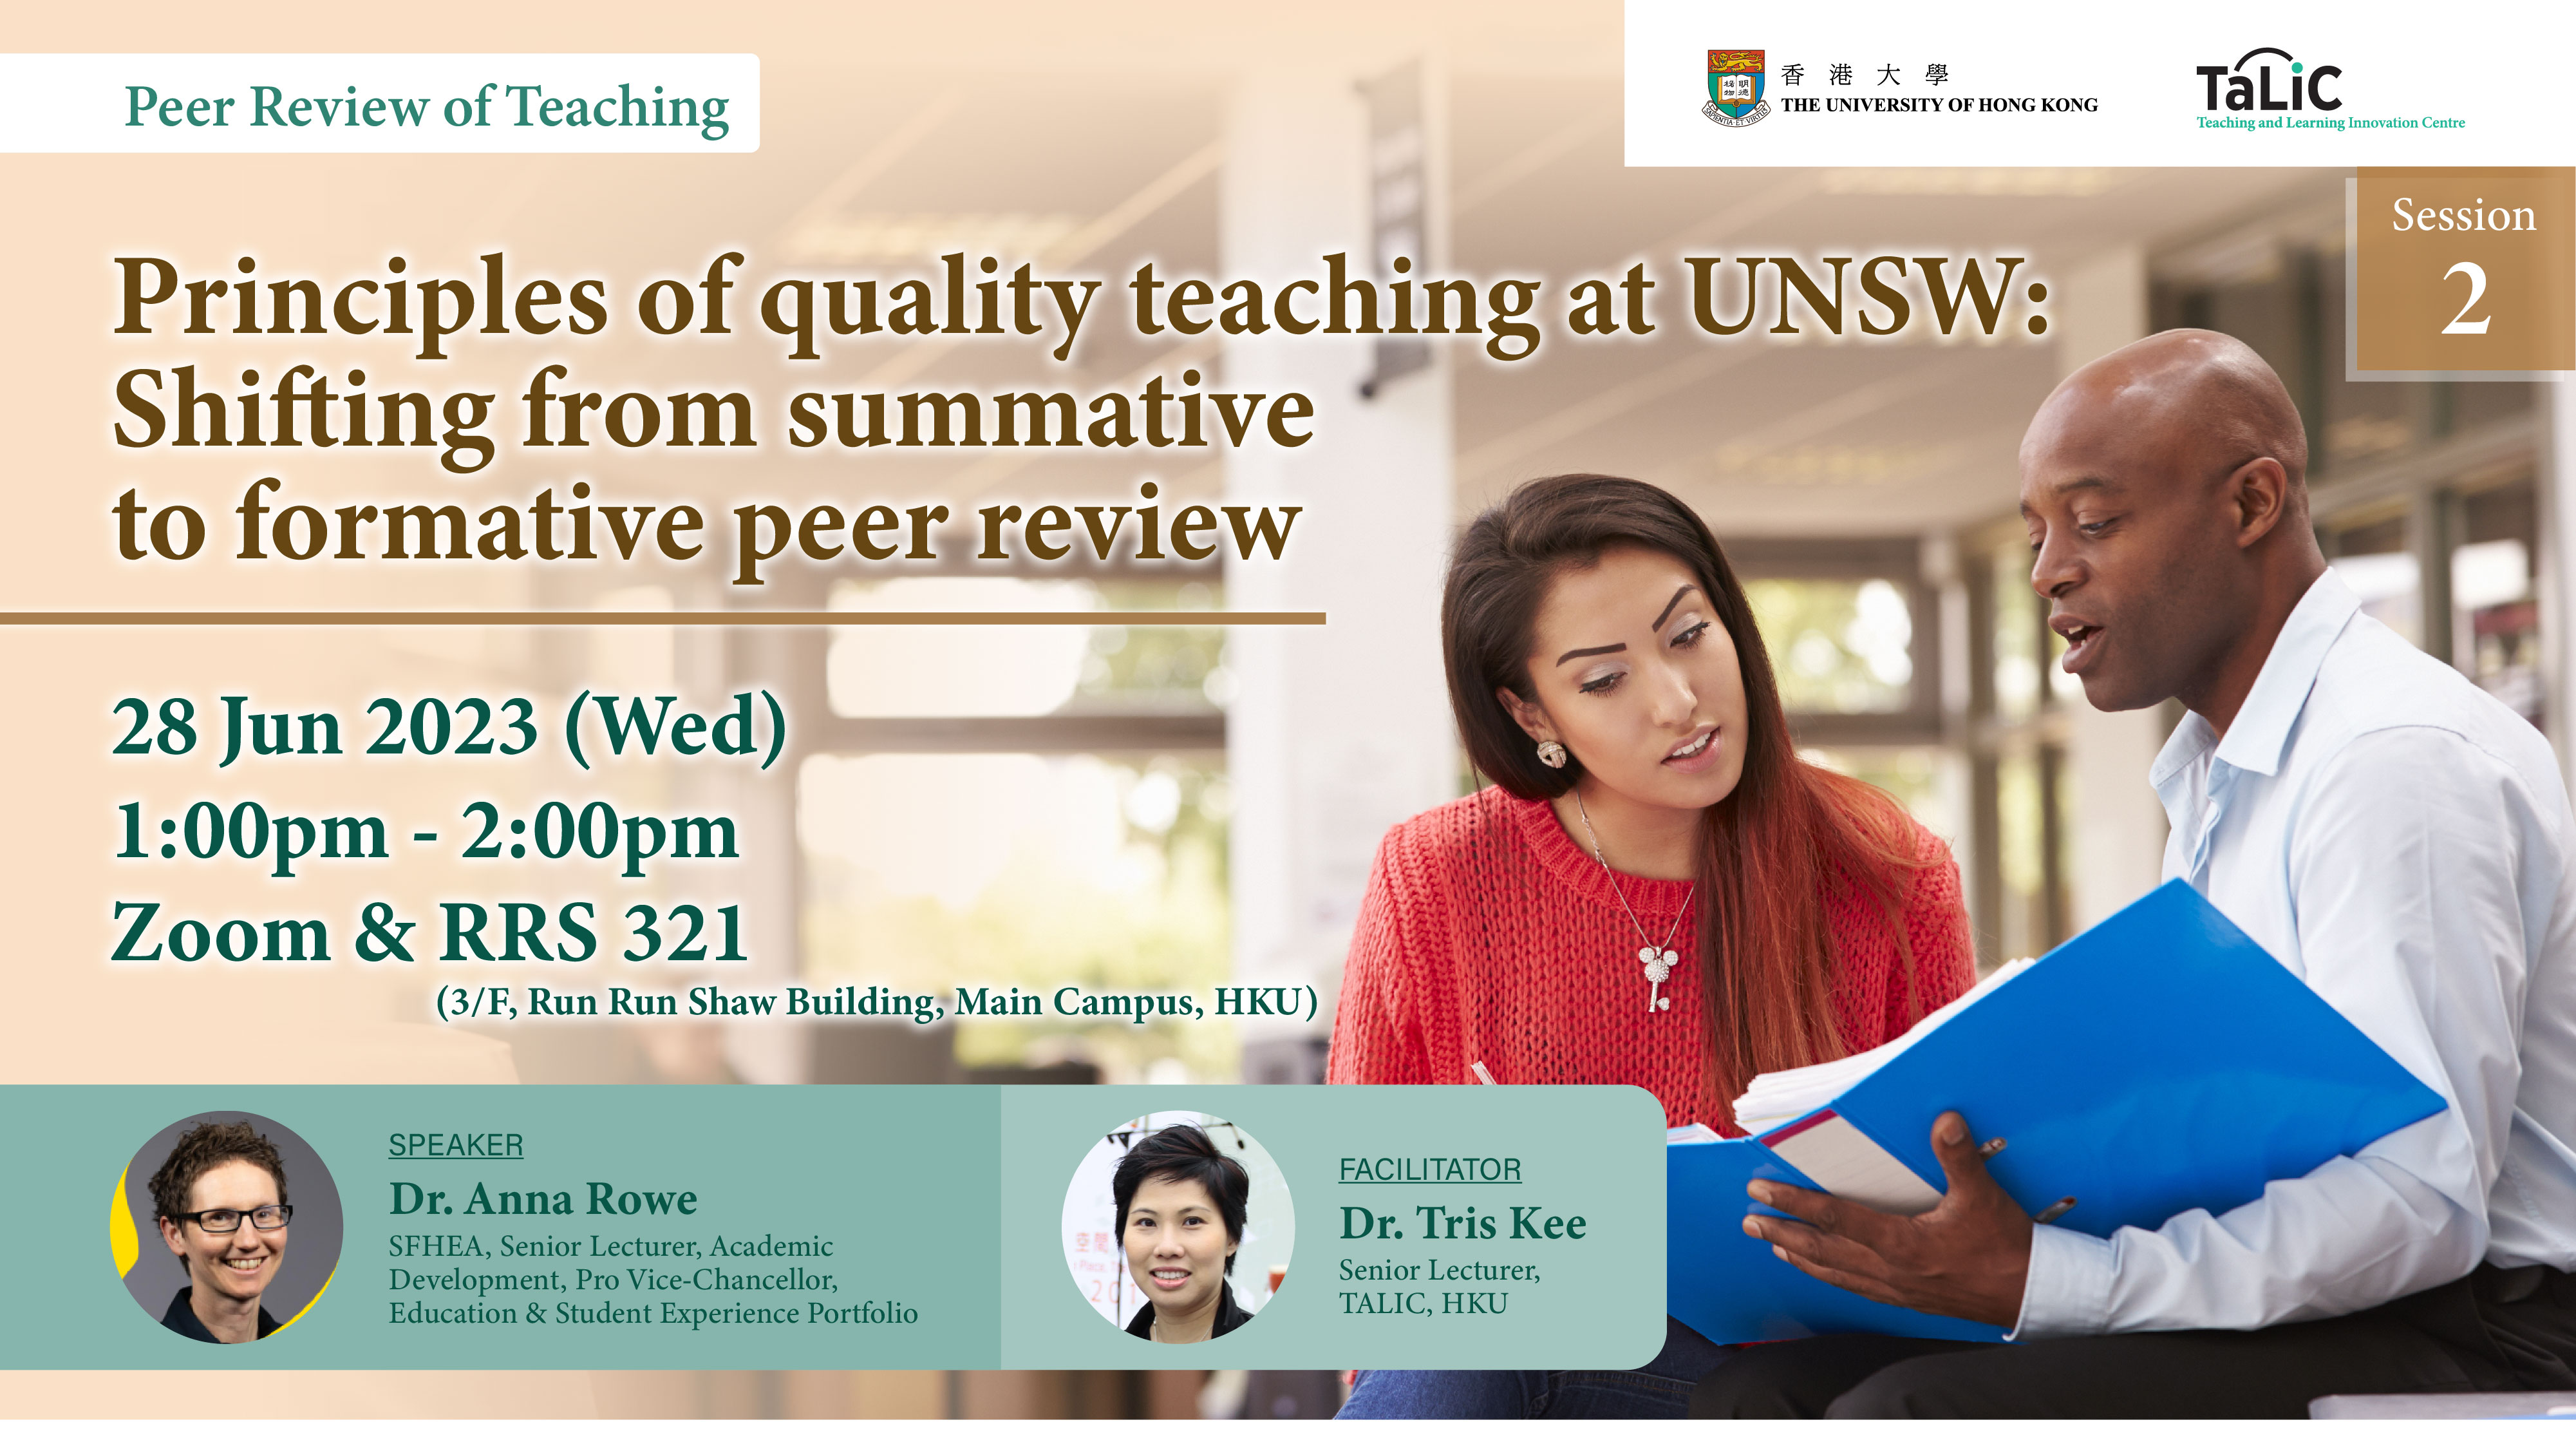 Session 2 | Principles of quality teaching at UNSW: Shifting from summative to formative peer review